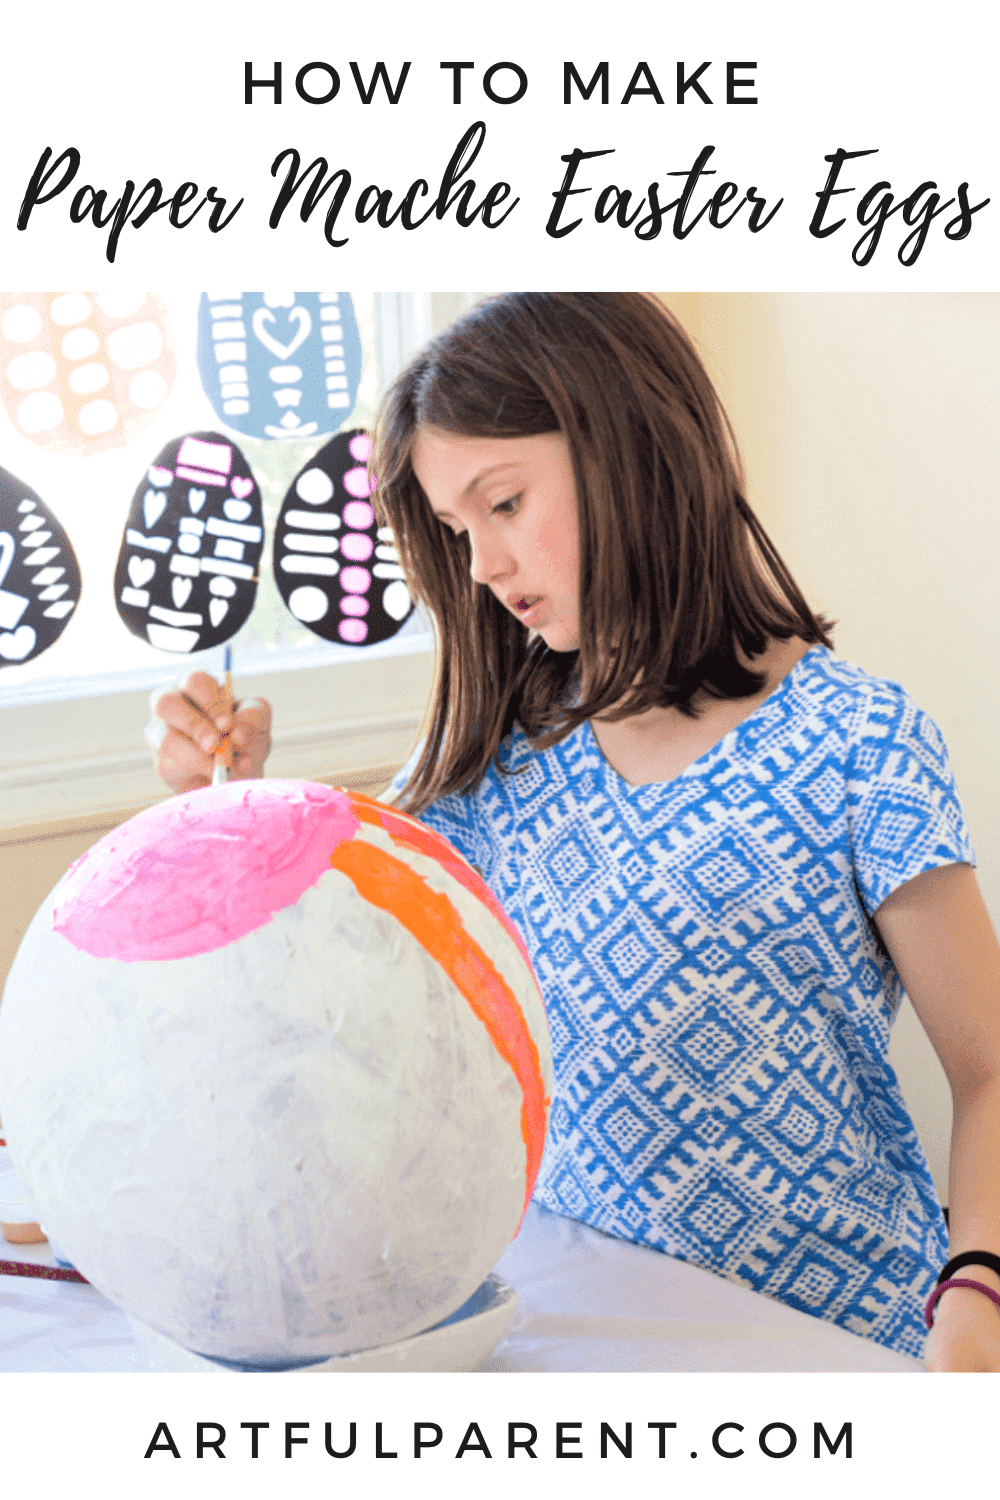 How to Make Paper Mache Easter Eggs